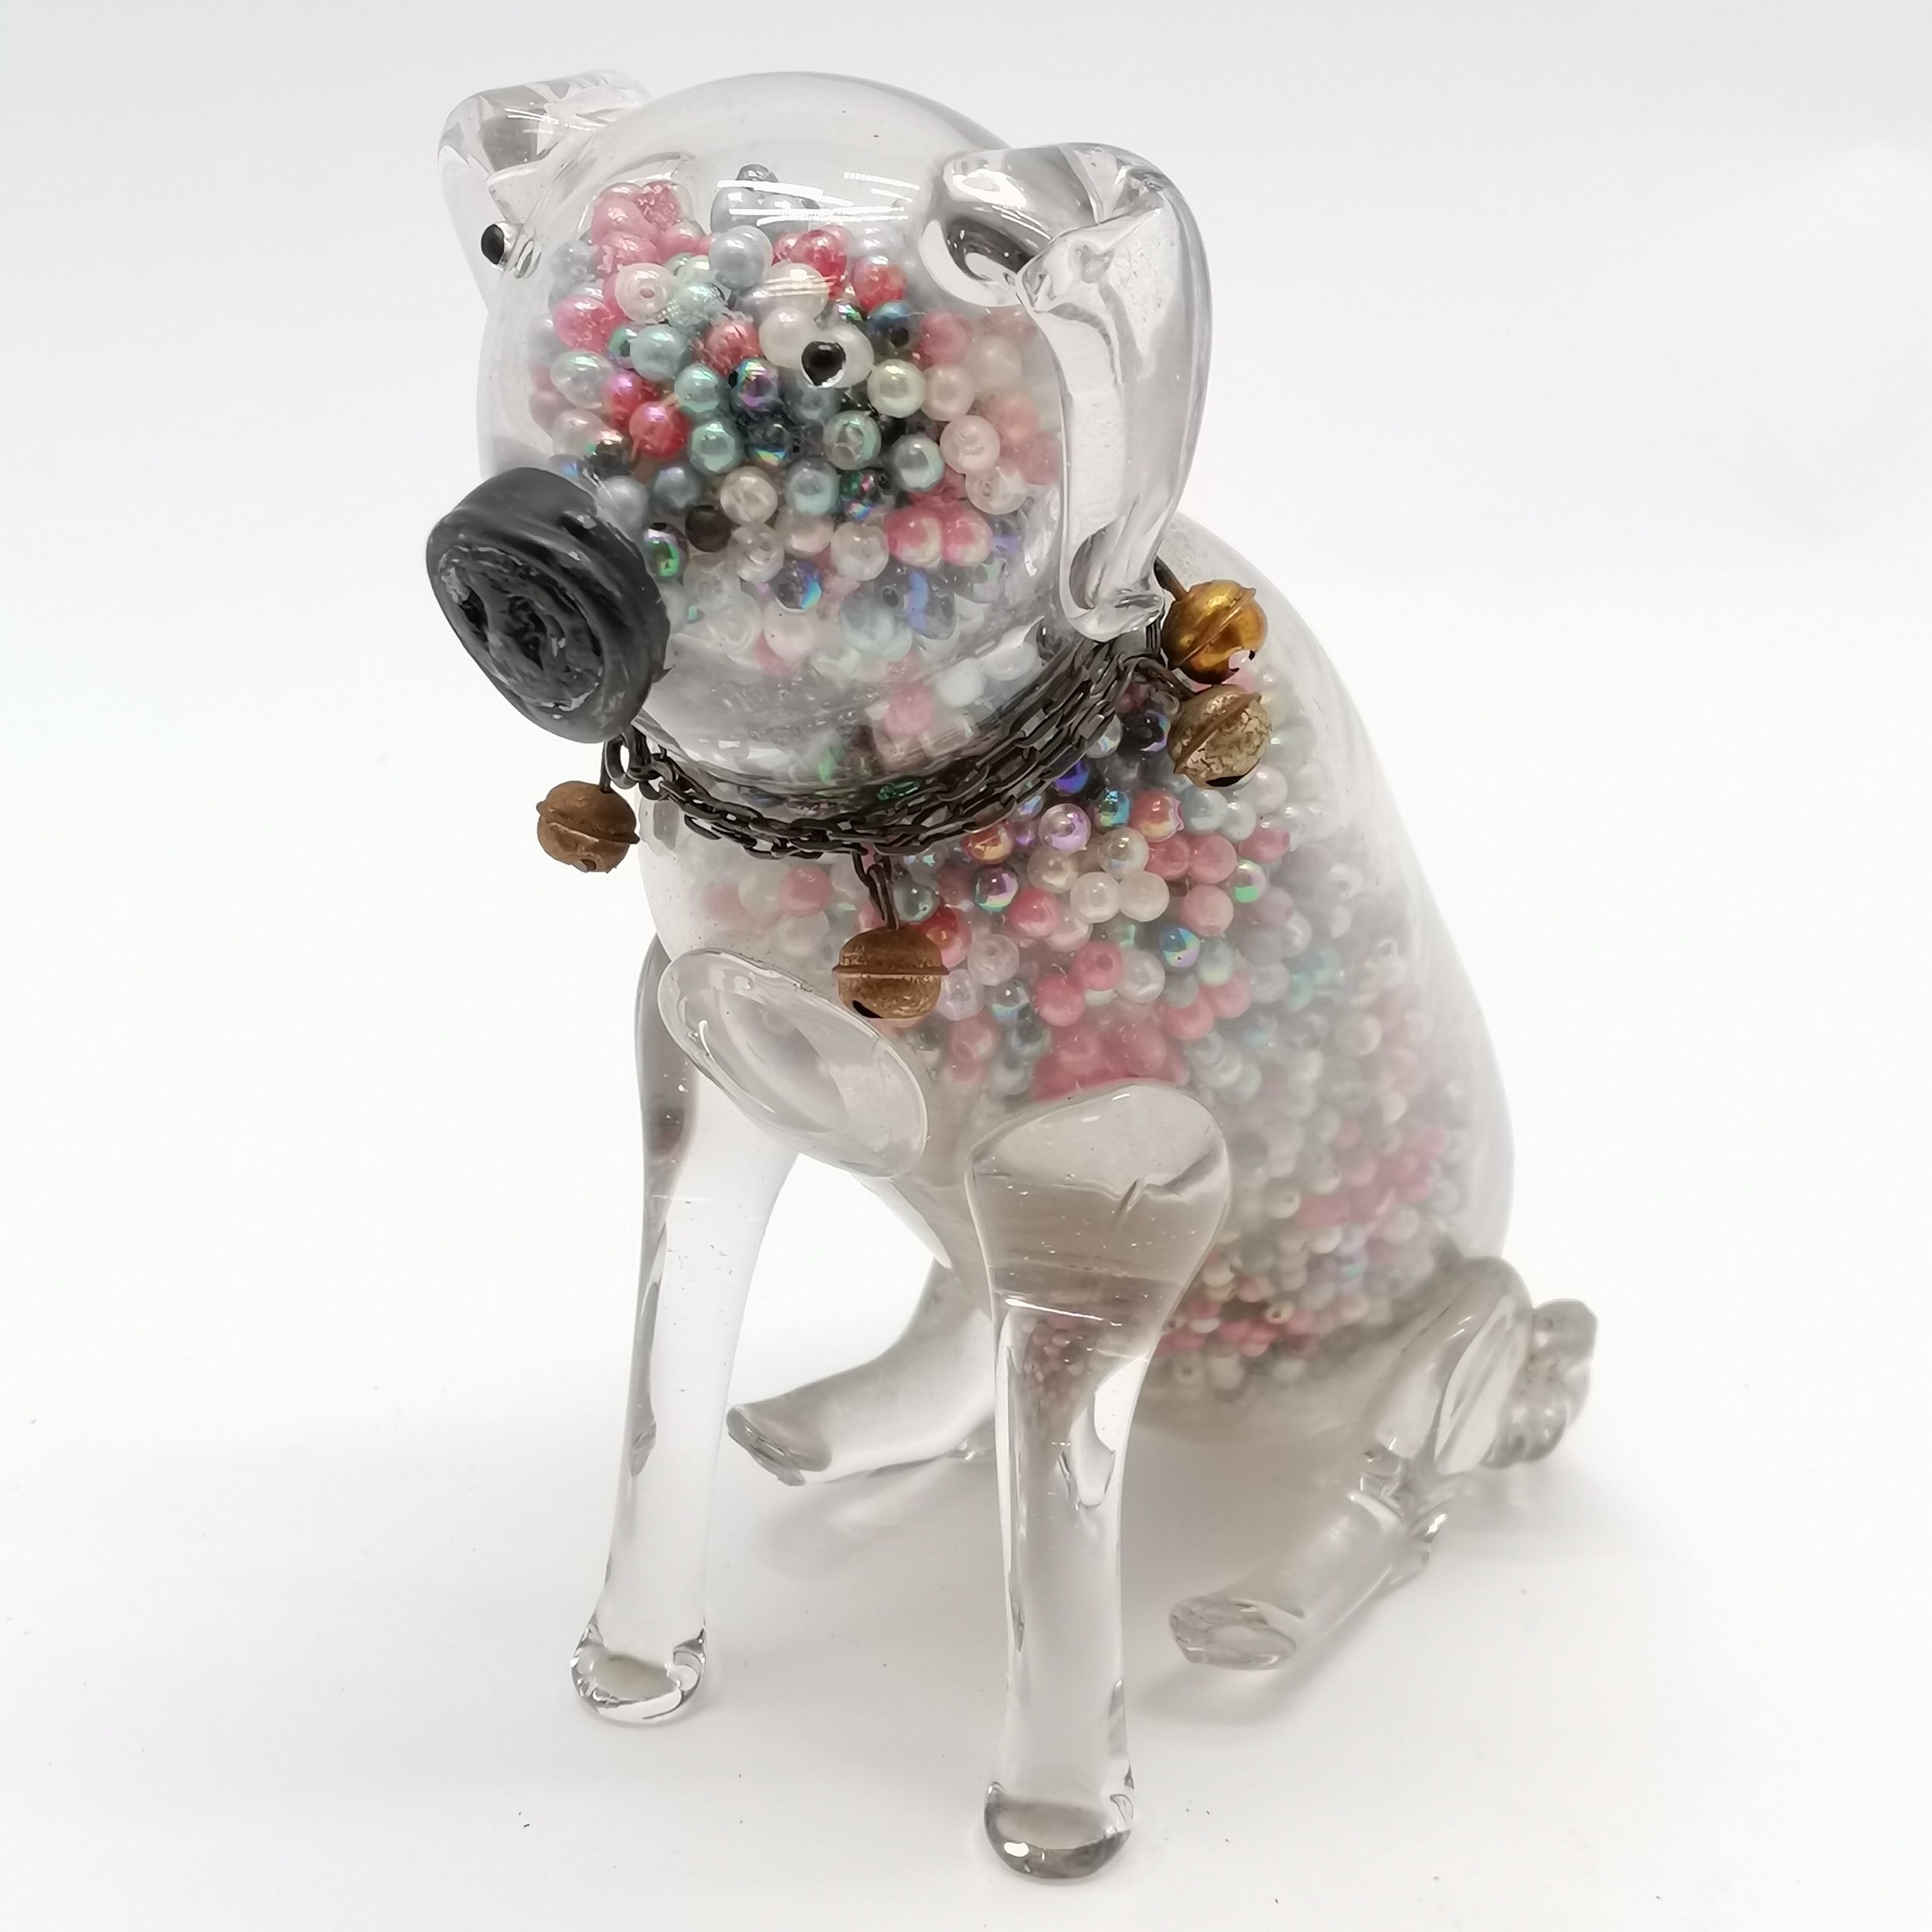 Unusual novelty glass dog figure filled with beads & has a metal chain collar with bells - 18.5cm